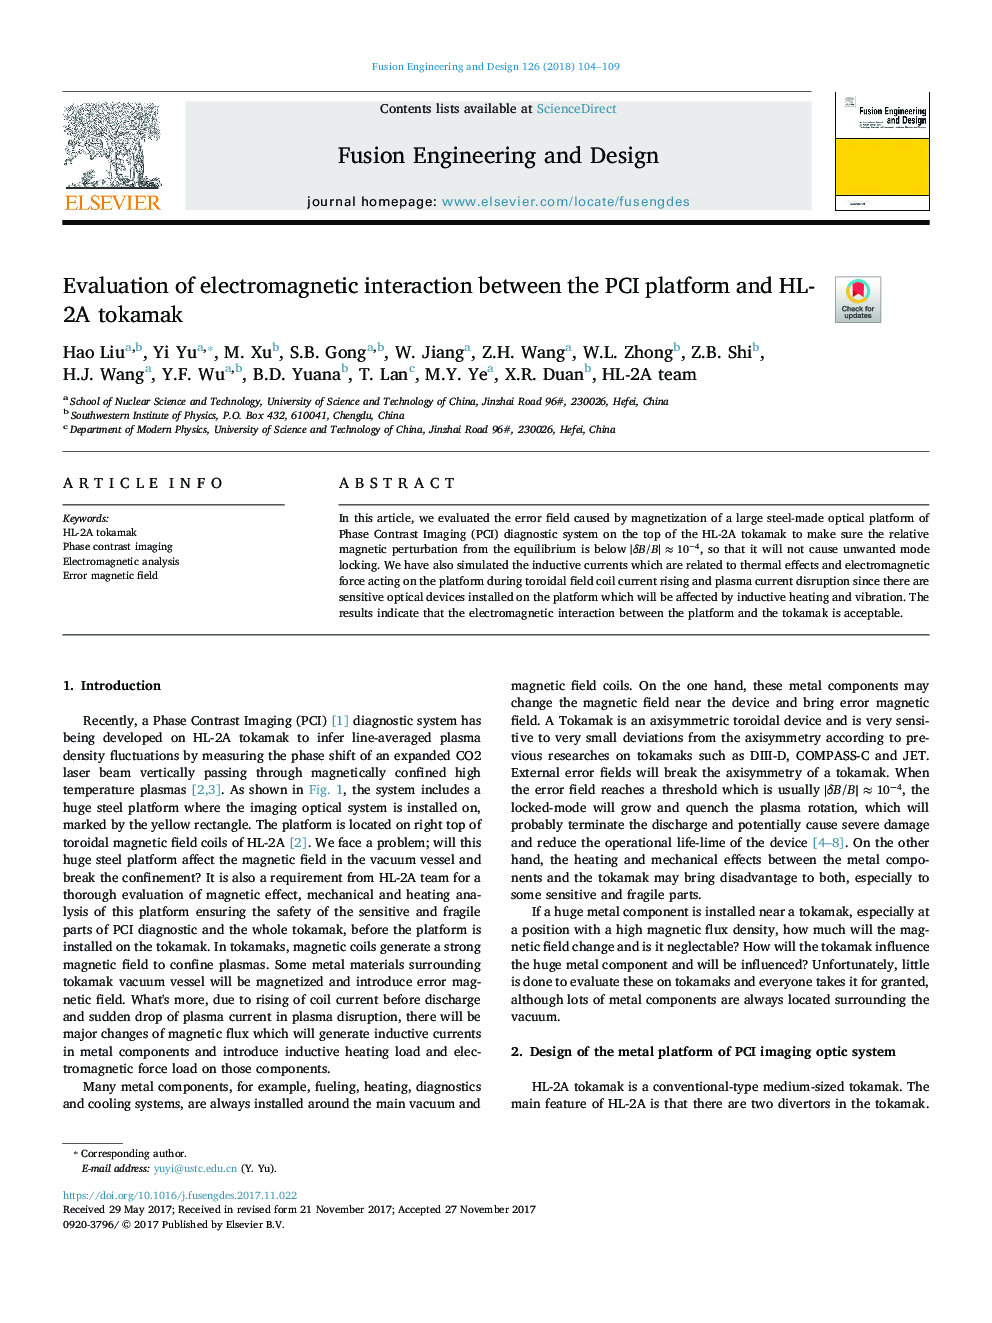 Evaluation of electromagnetic interaction between the PCI platform and HL-2A tokamak